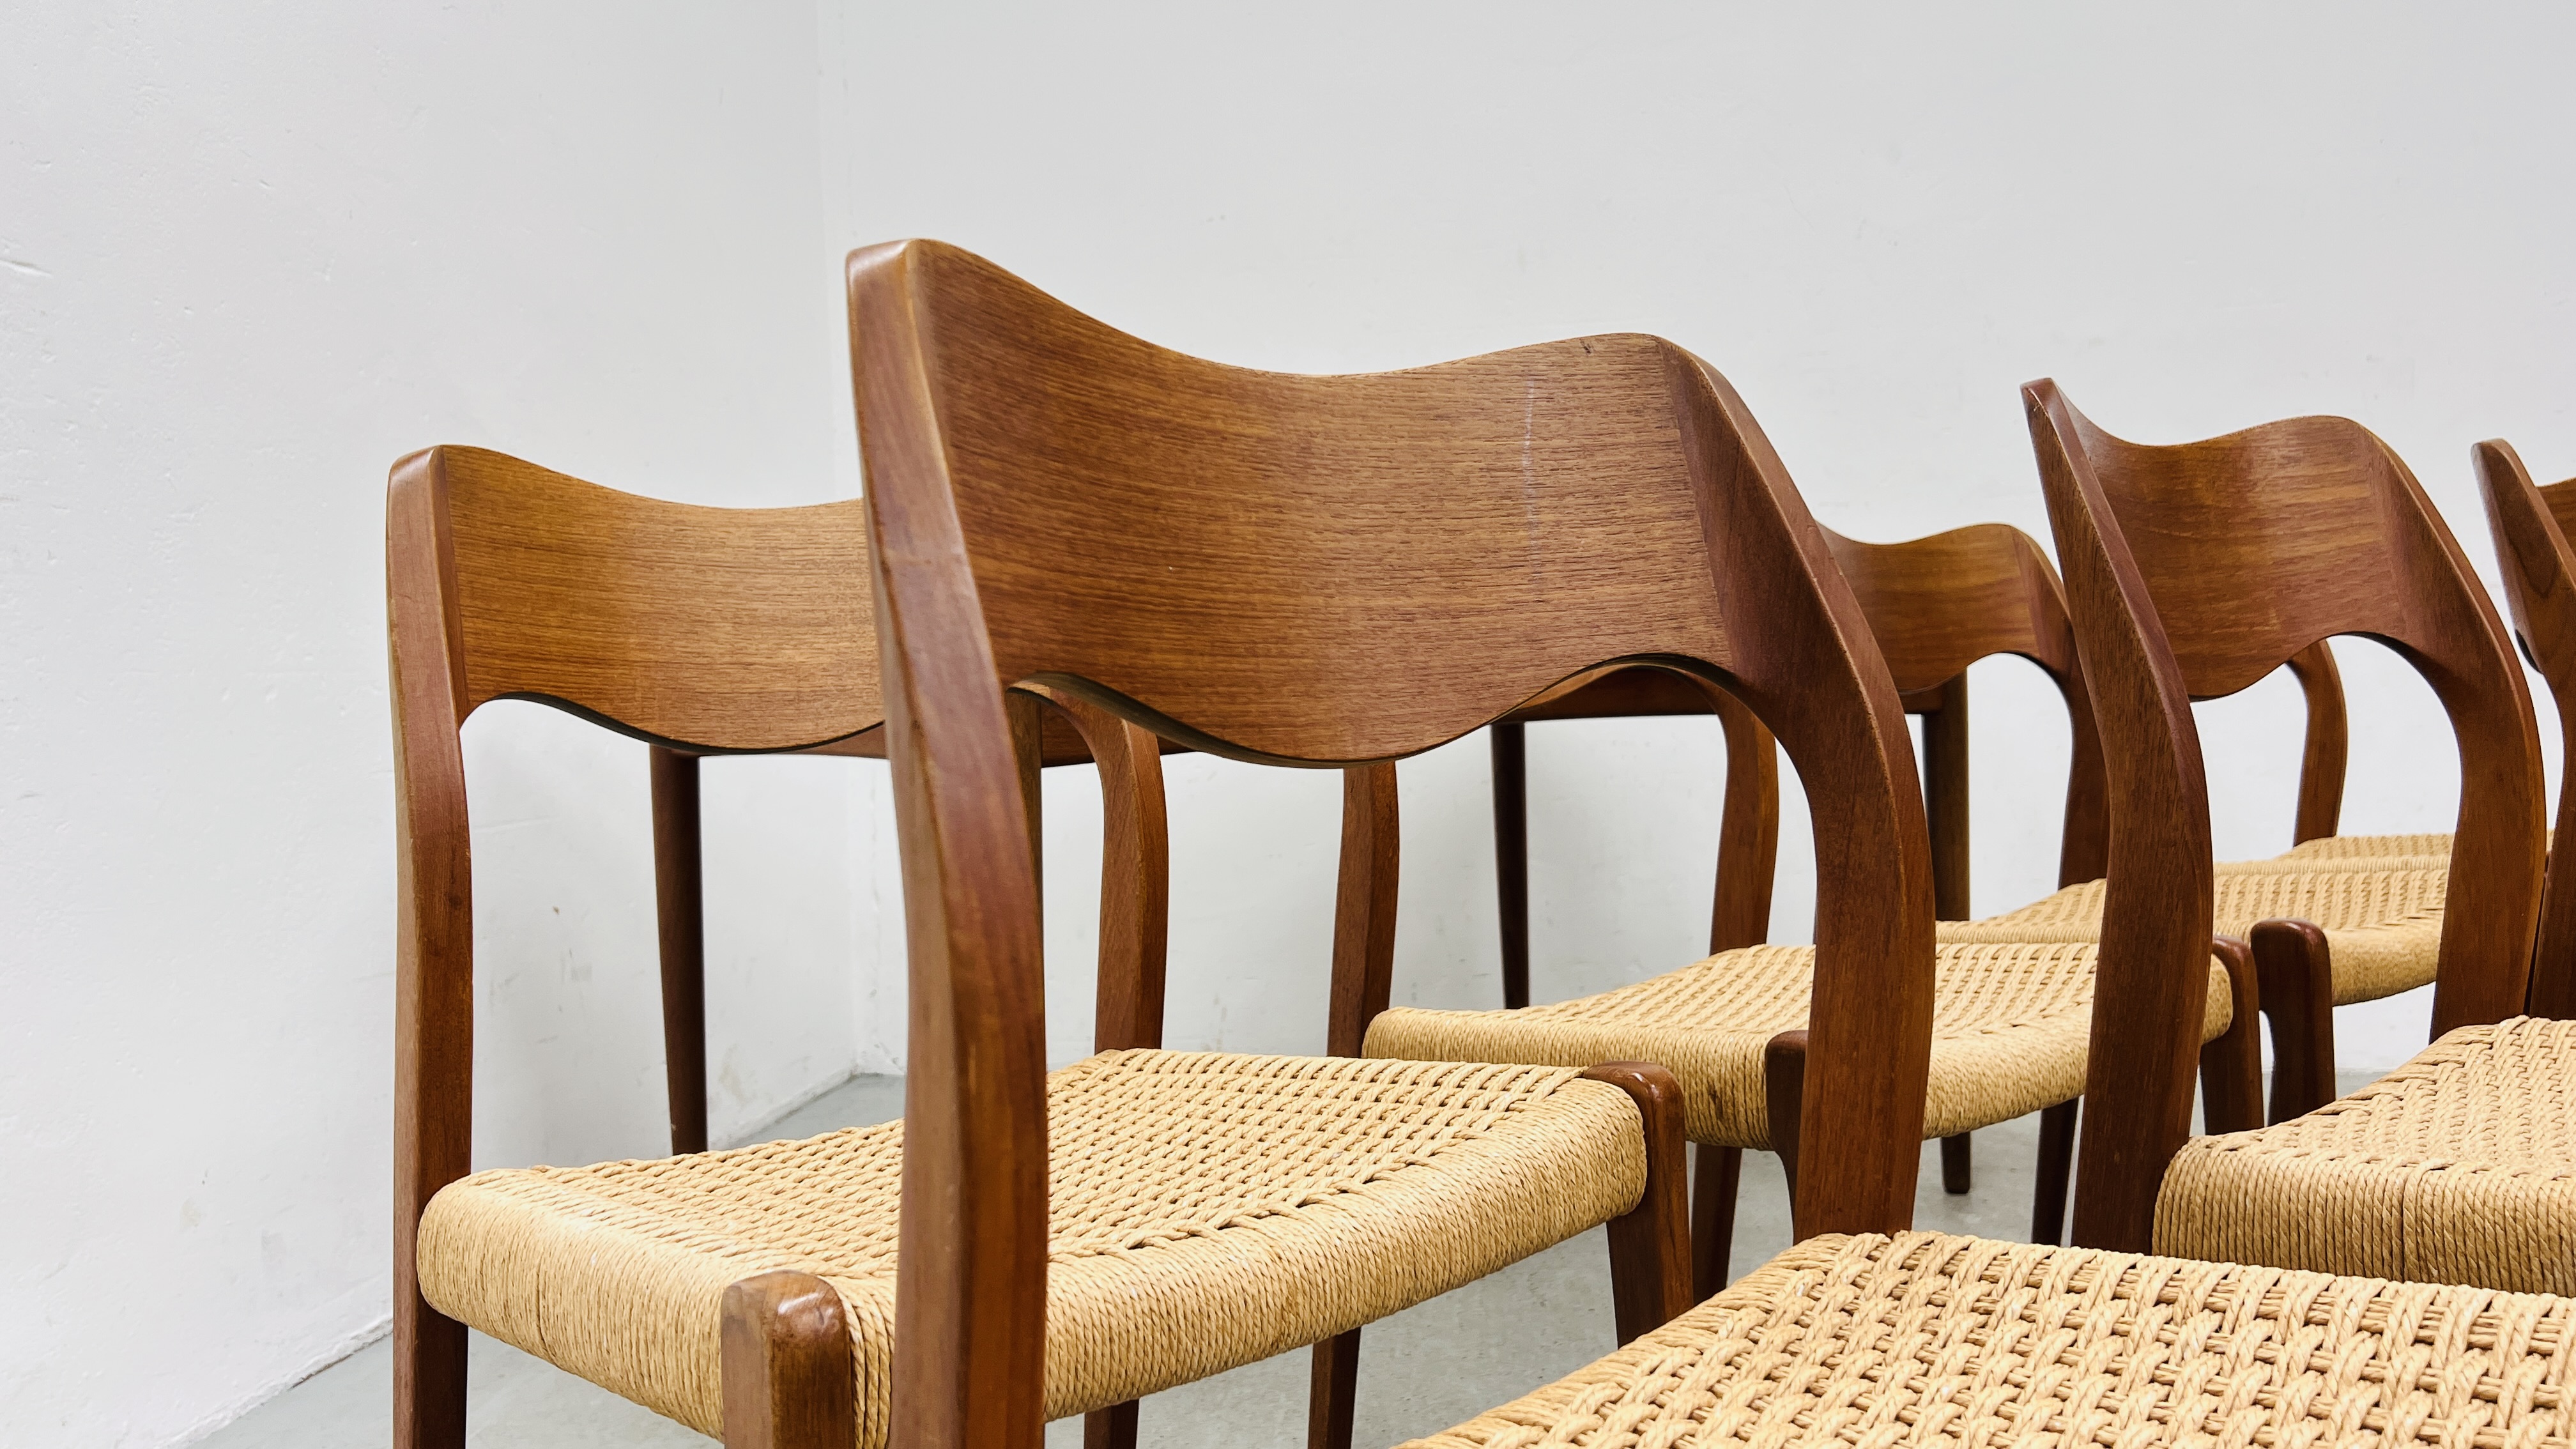 SET OF EIGHT J MOLLER DANISH TEAK DINING CHAIRS WITH WOVEN SISAL SEATS ALONG WITH A DRAWER LEAF - Image 21 of 48